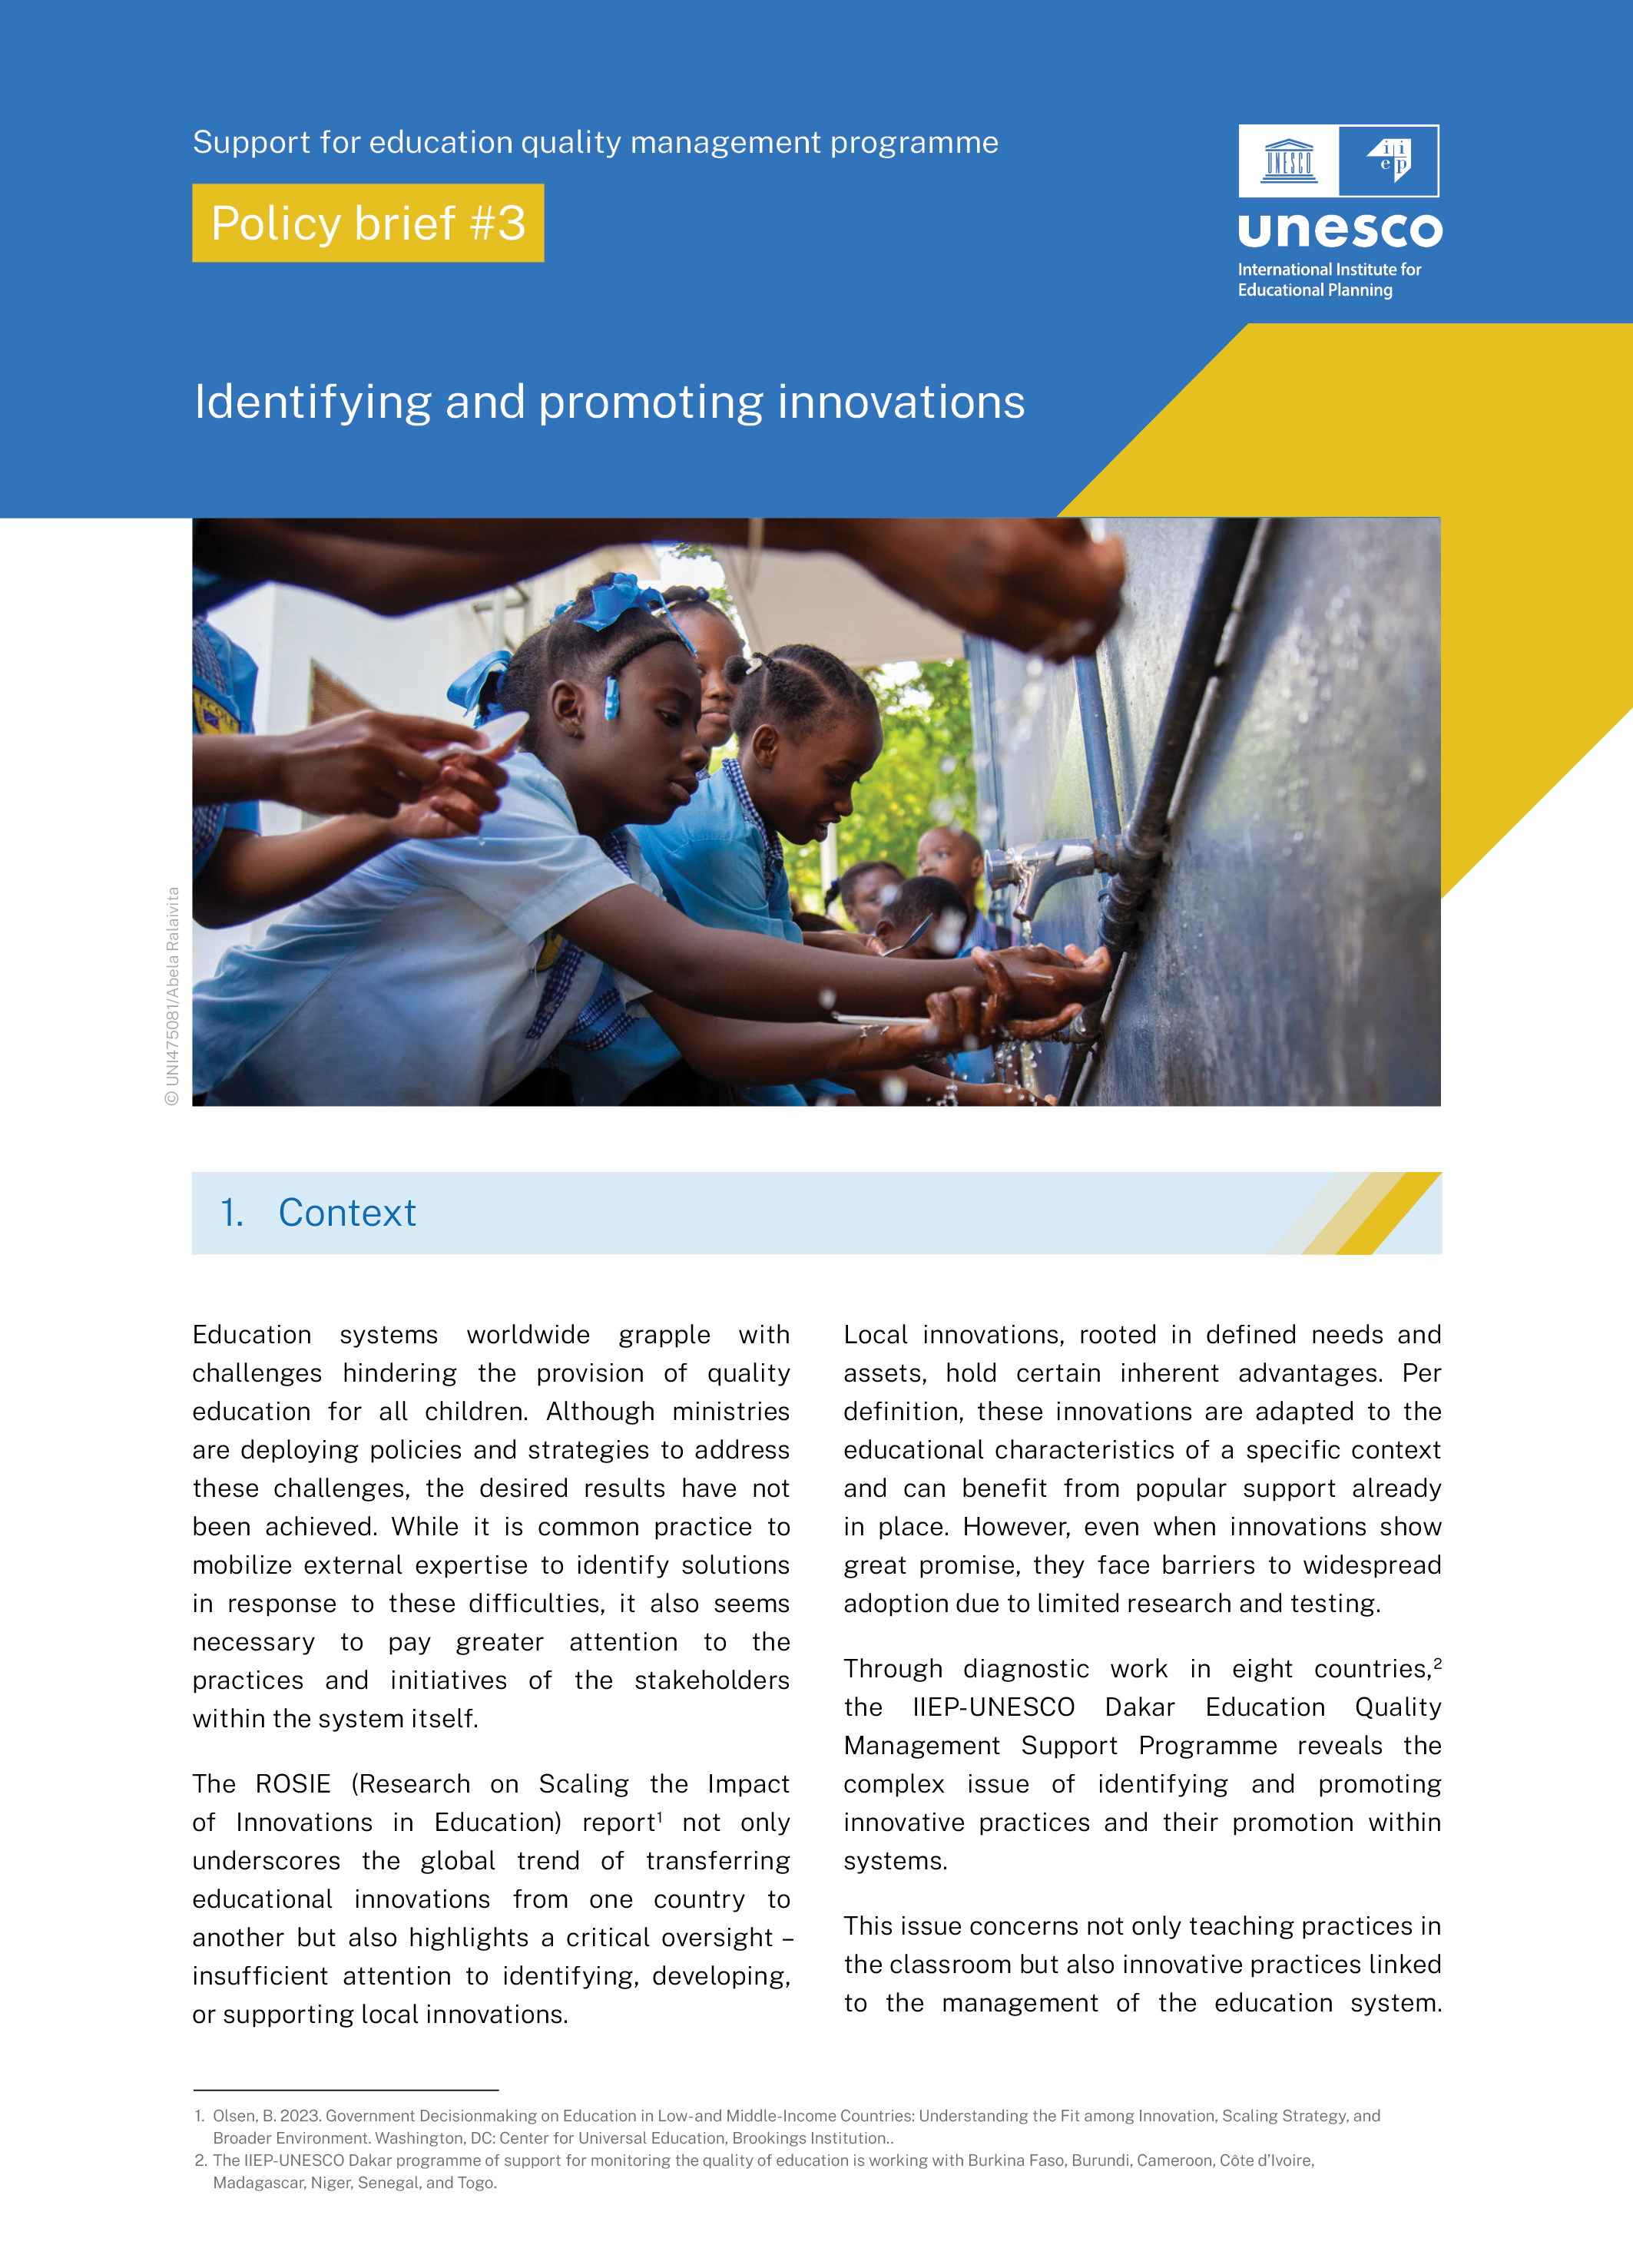 Identifying and promoting innovations